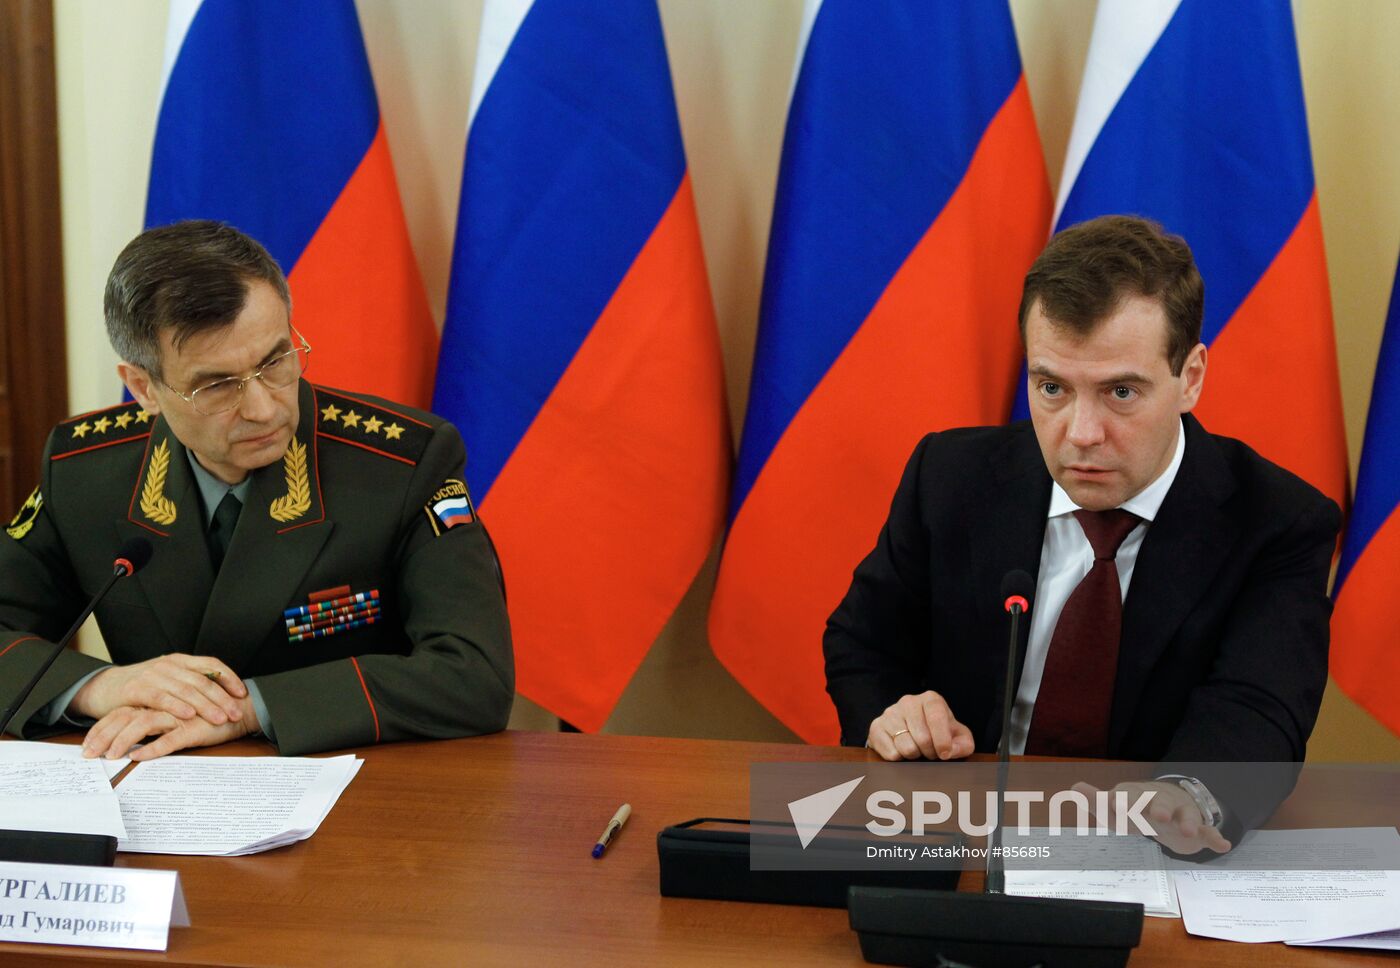 Dmitry Medvedev holds a meeting at the Internal Affairs ministry